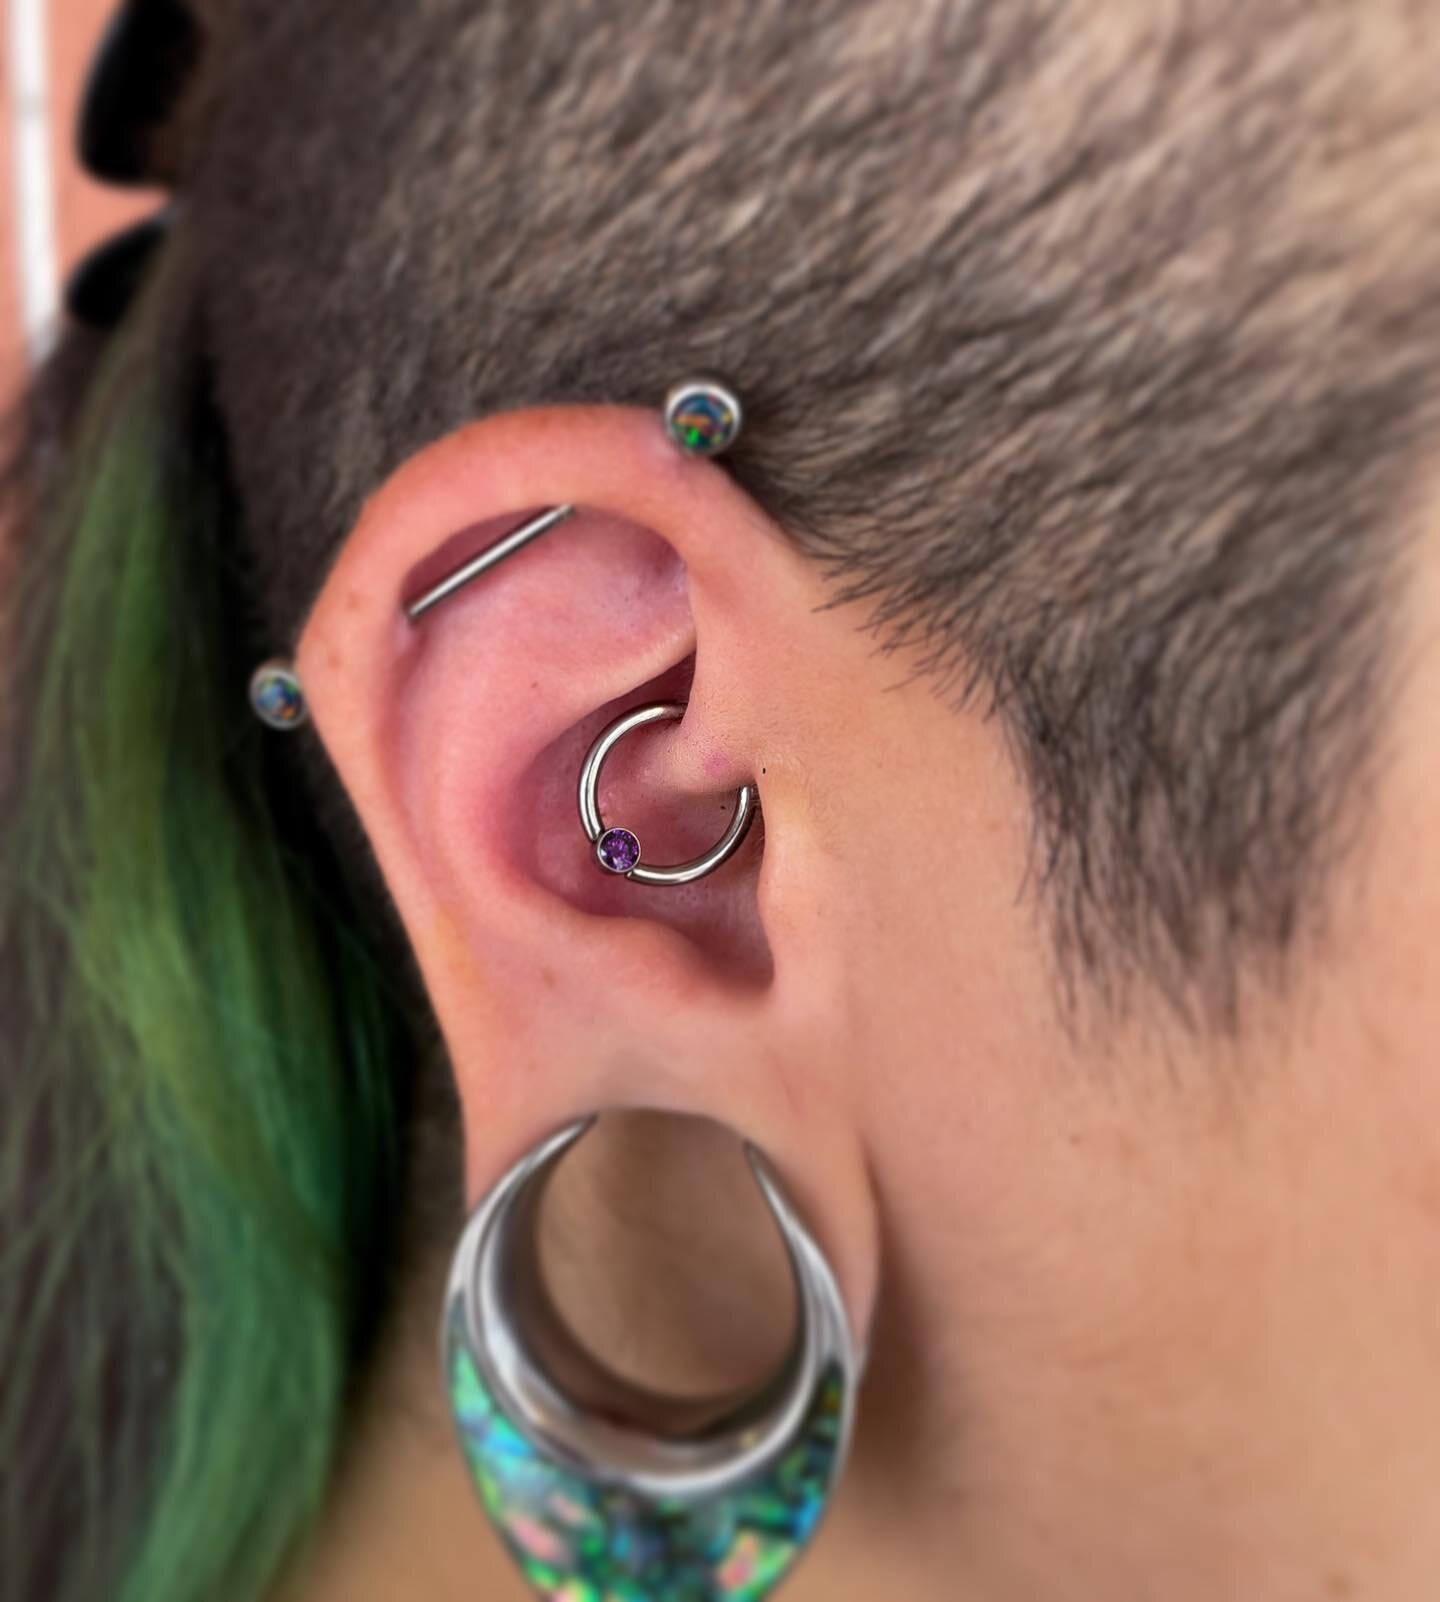 1st daith accomplished the other day ✨14g 7/16&rdquo; F-136 titanium cbr with a 3mm Amethyst gem from @industrialstrength ✨